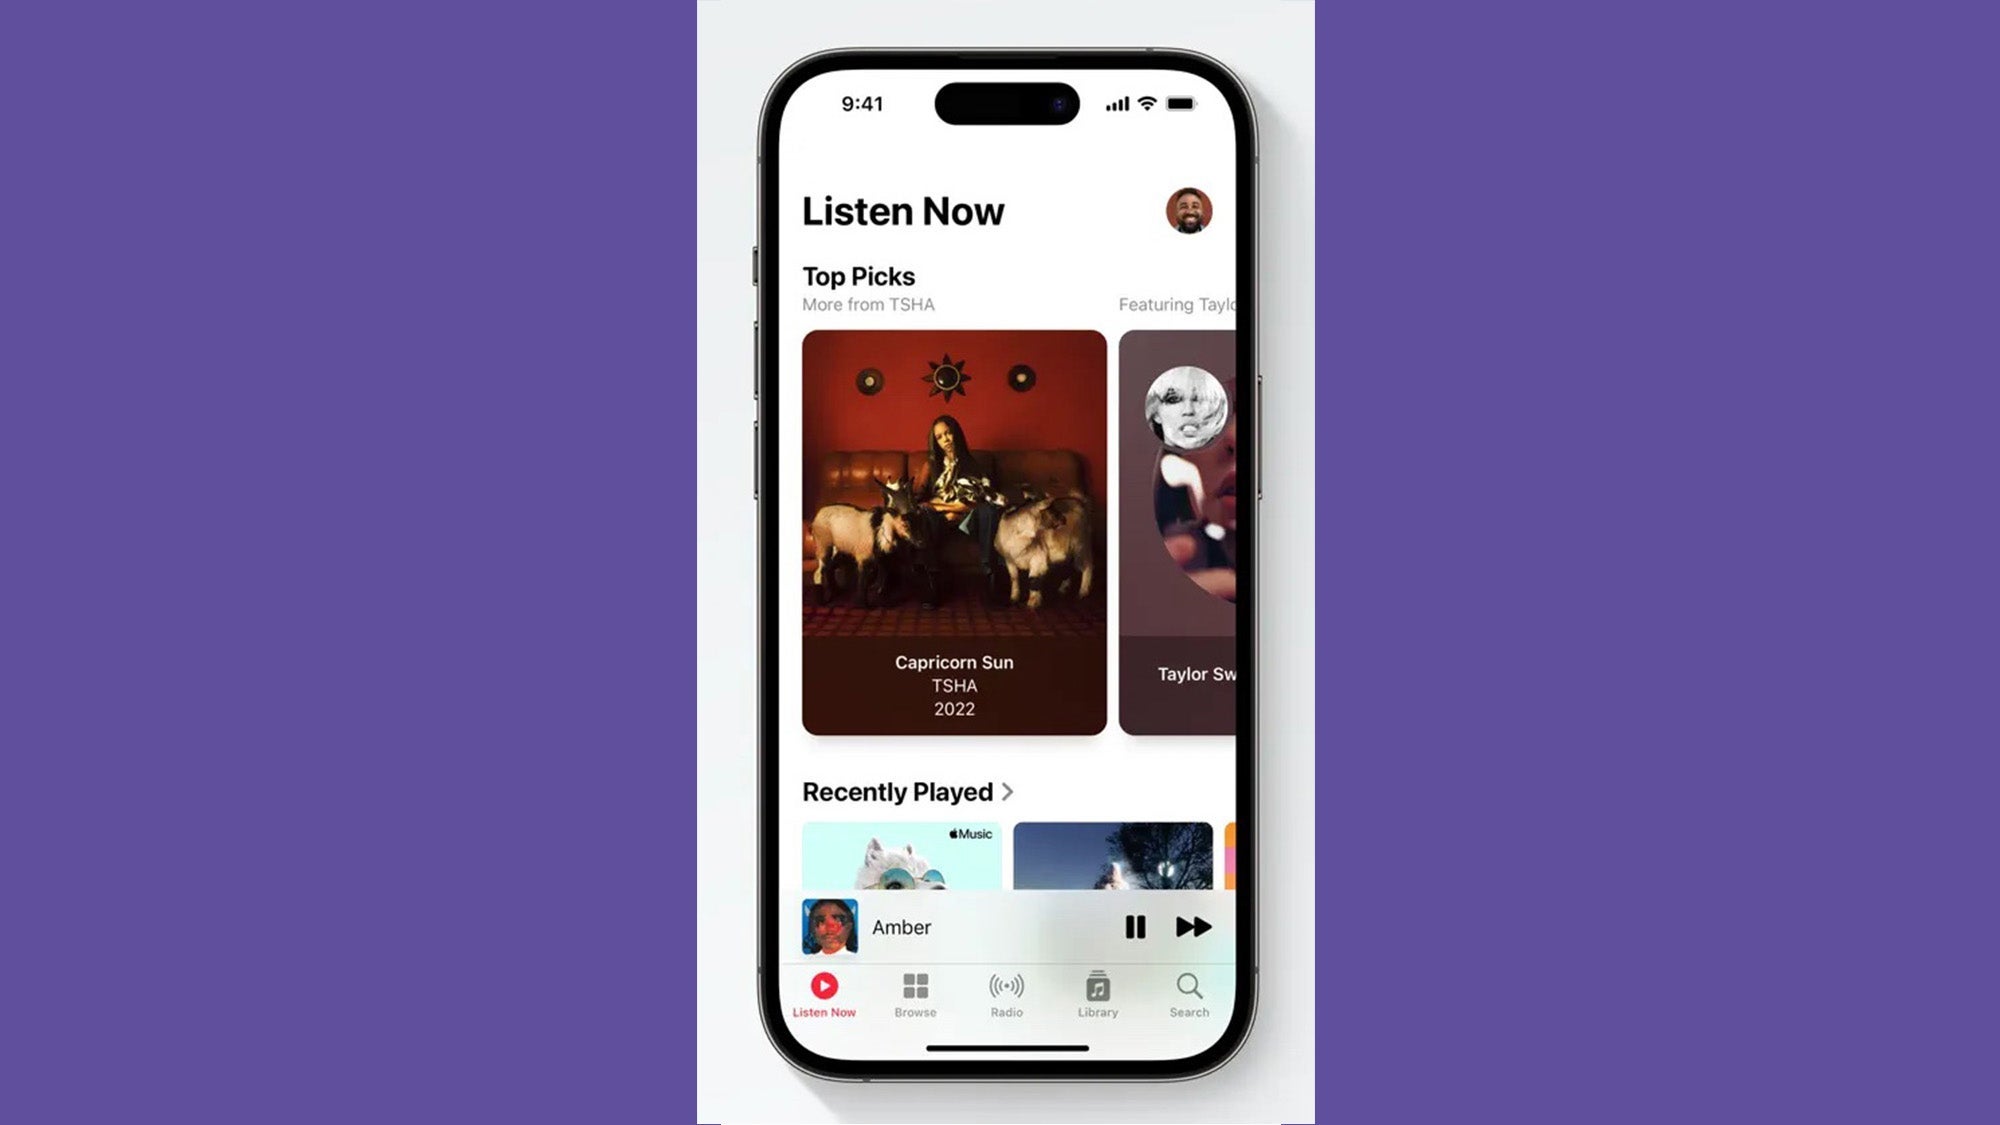 To cancel your Apple Music subscription on your iPhone, click Listen Now.